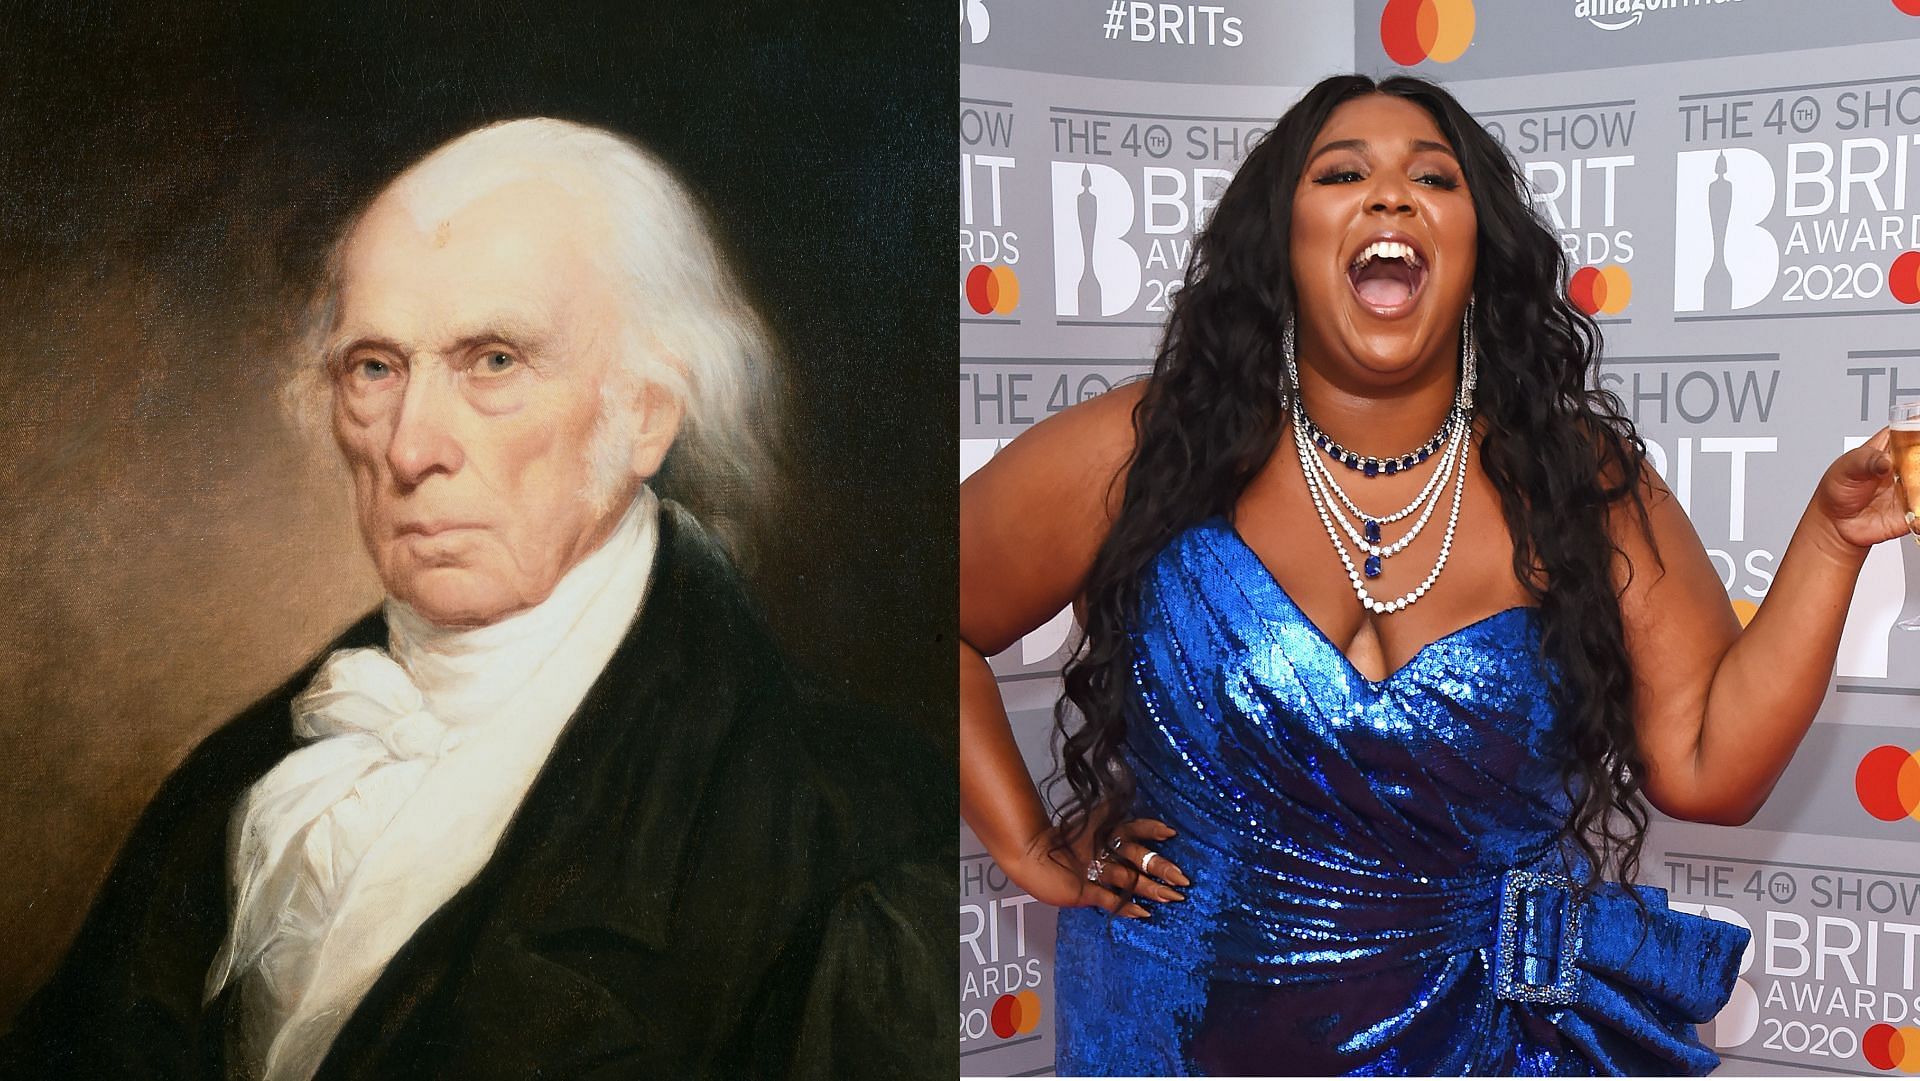 Lizzo was hailed by Twitterati for making history. (Photo via Getty Images, Dave Benett/Getty Images)